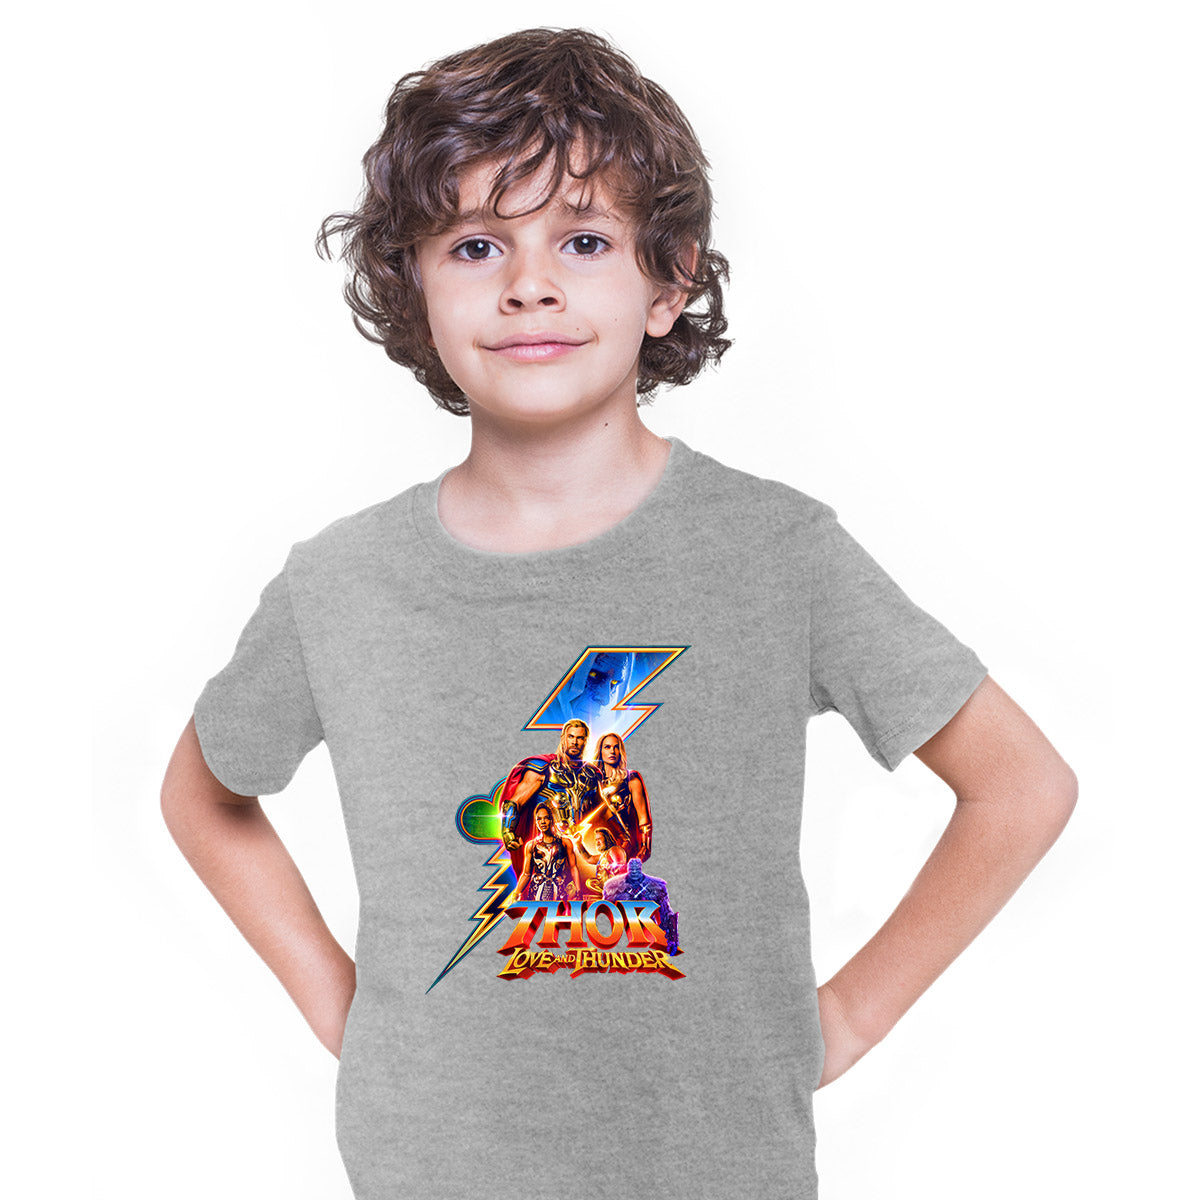 Thor Love and Thunder Tee A journey unlike anything he's ever faced Kids T-Shirt Grey